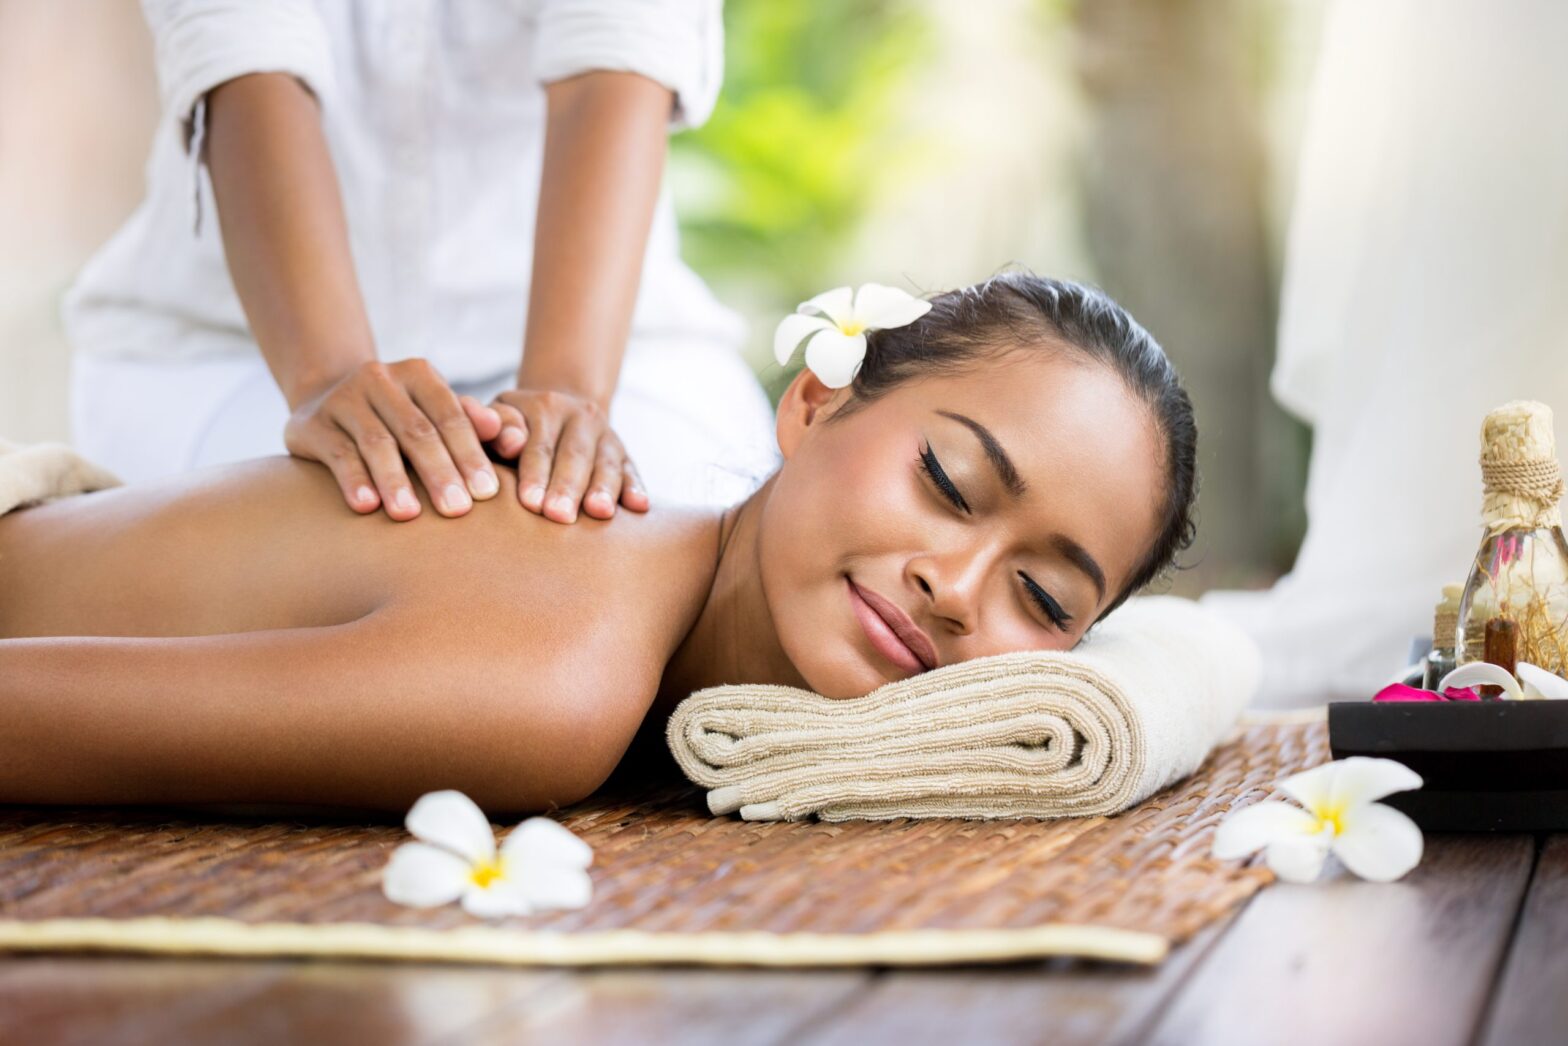 A Basic Guide for Professional Spa and Massage Courses